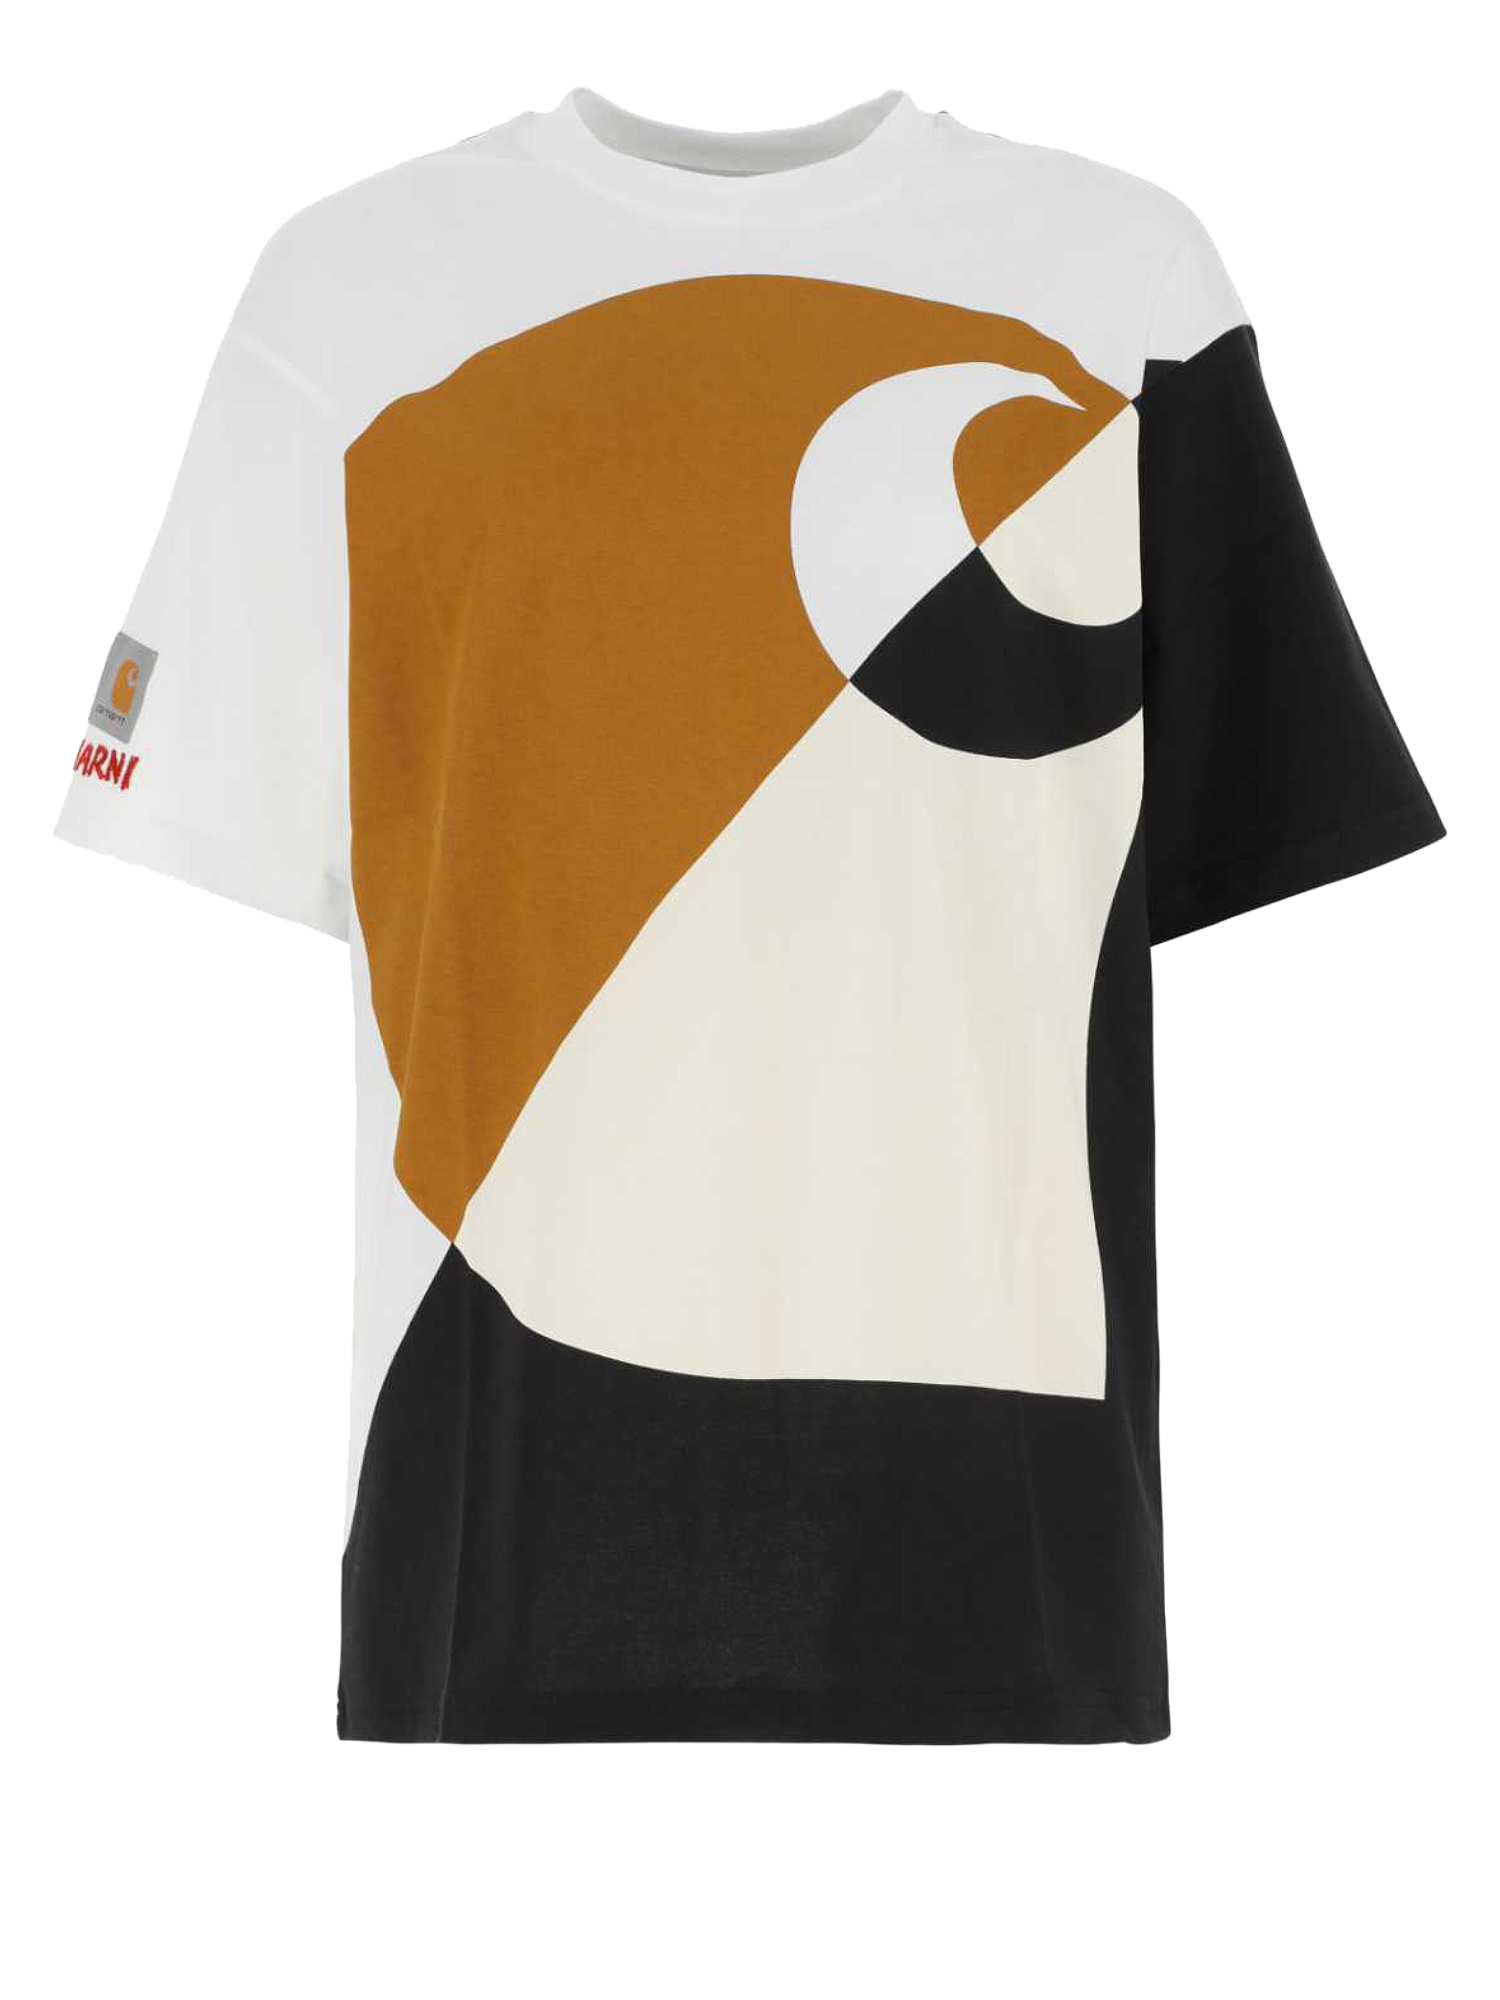 + Carhartt Wip Printed Cotton T-shirt In Multicolor